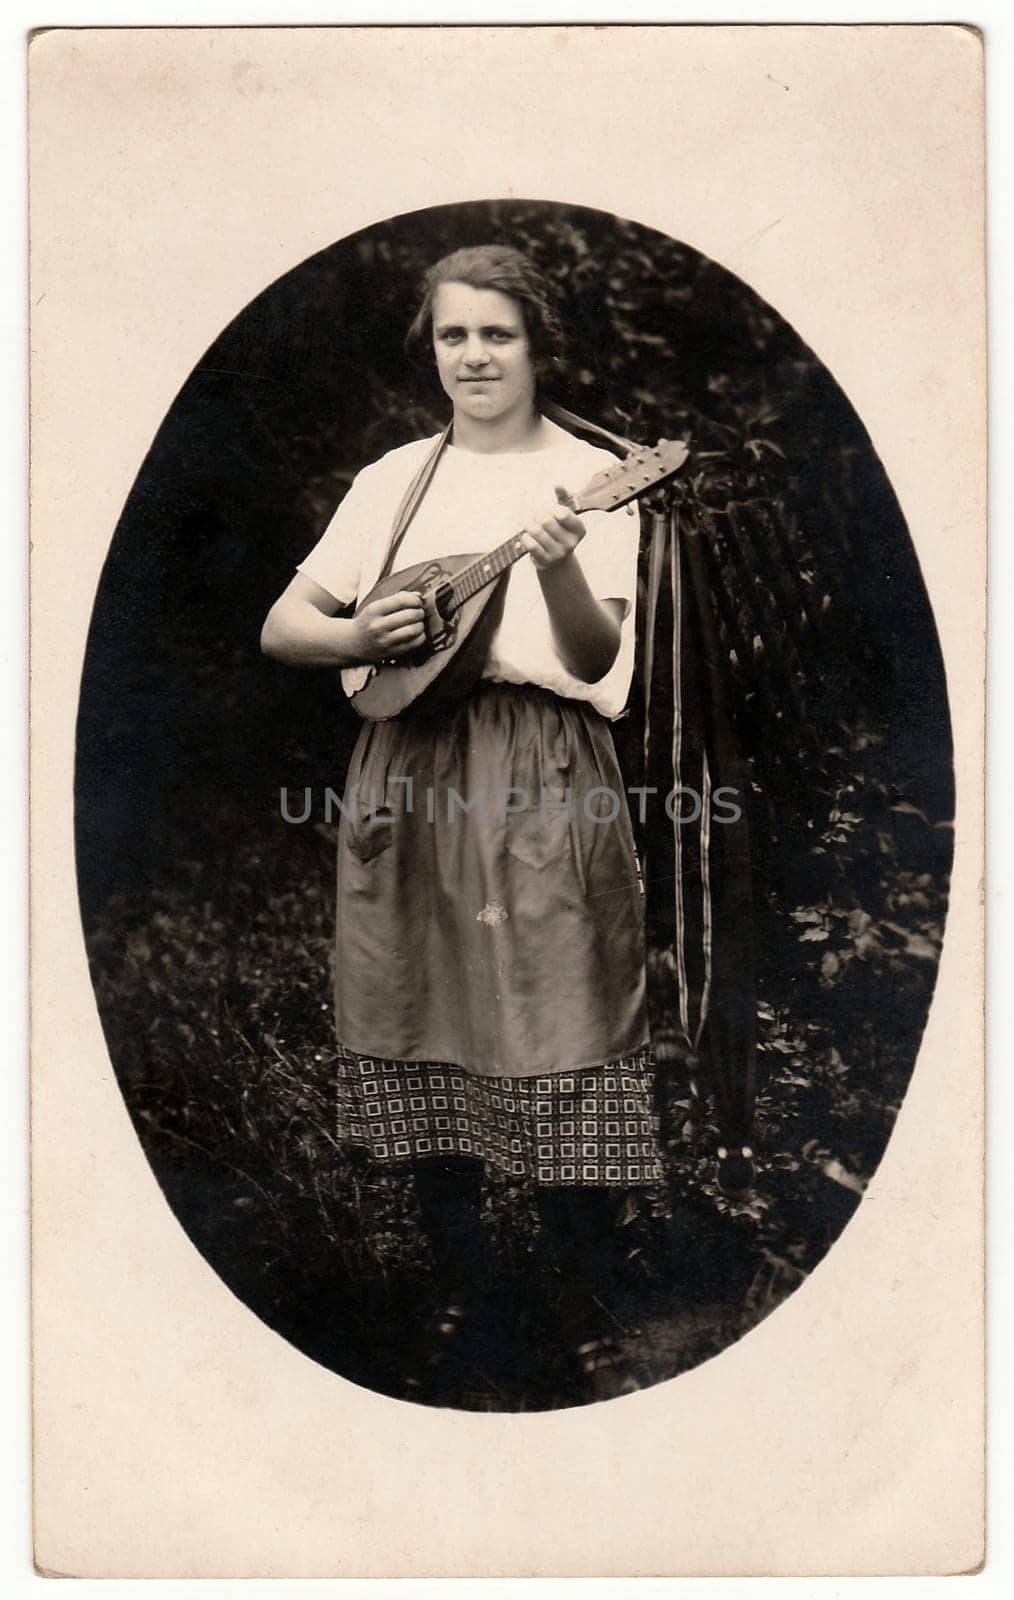 Vintage photo shows a woman plays the mandolin outdoors. Photo is oval shape. Black white antique photo. by roman_nerud